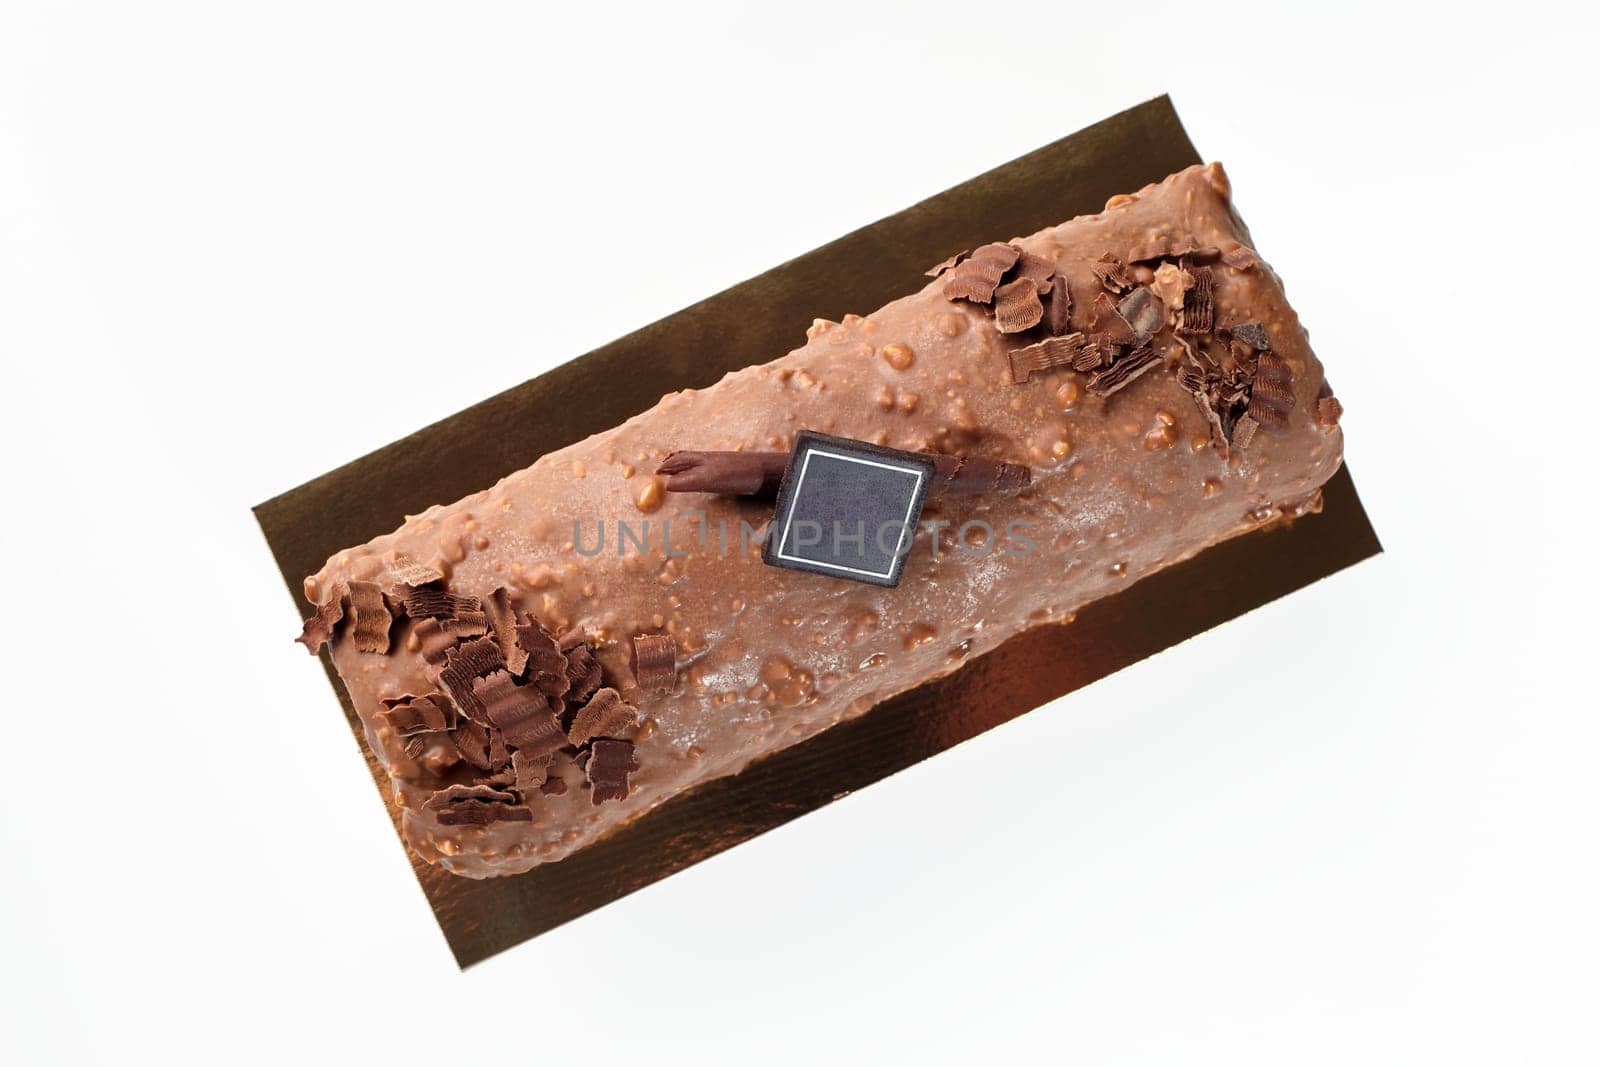 Artisan loaf cake glazed with milk chocolate icing and hazelnut crumbs isolated on white background, ideal for delicious snacking